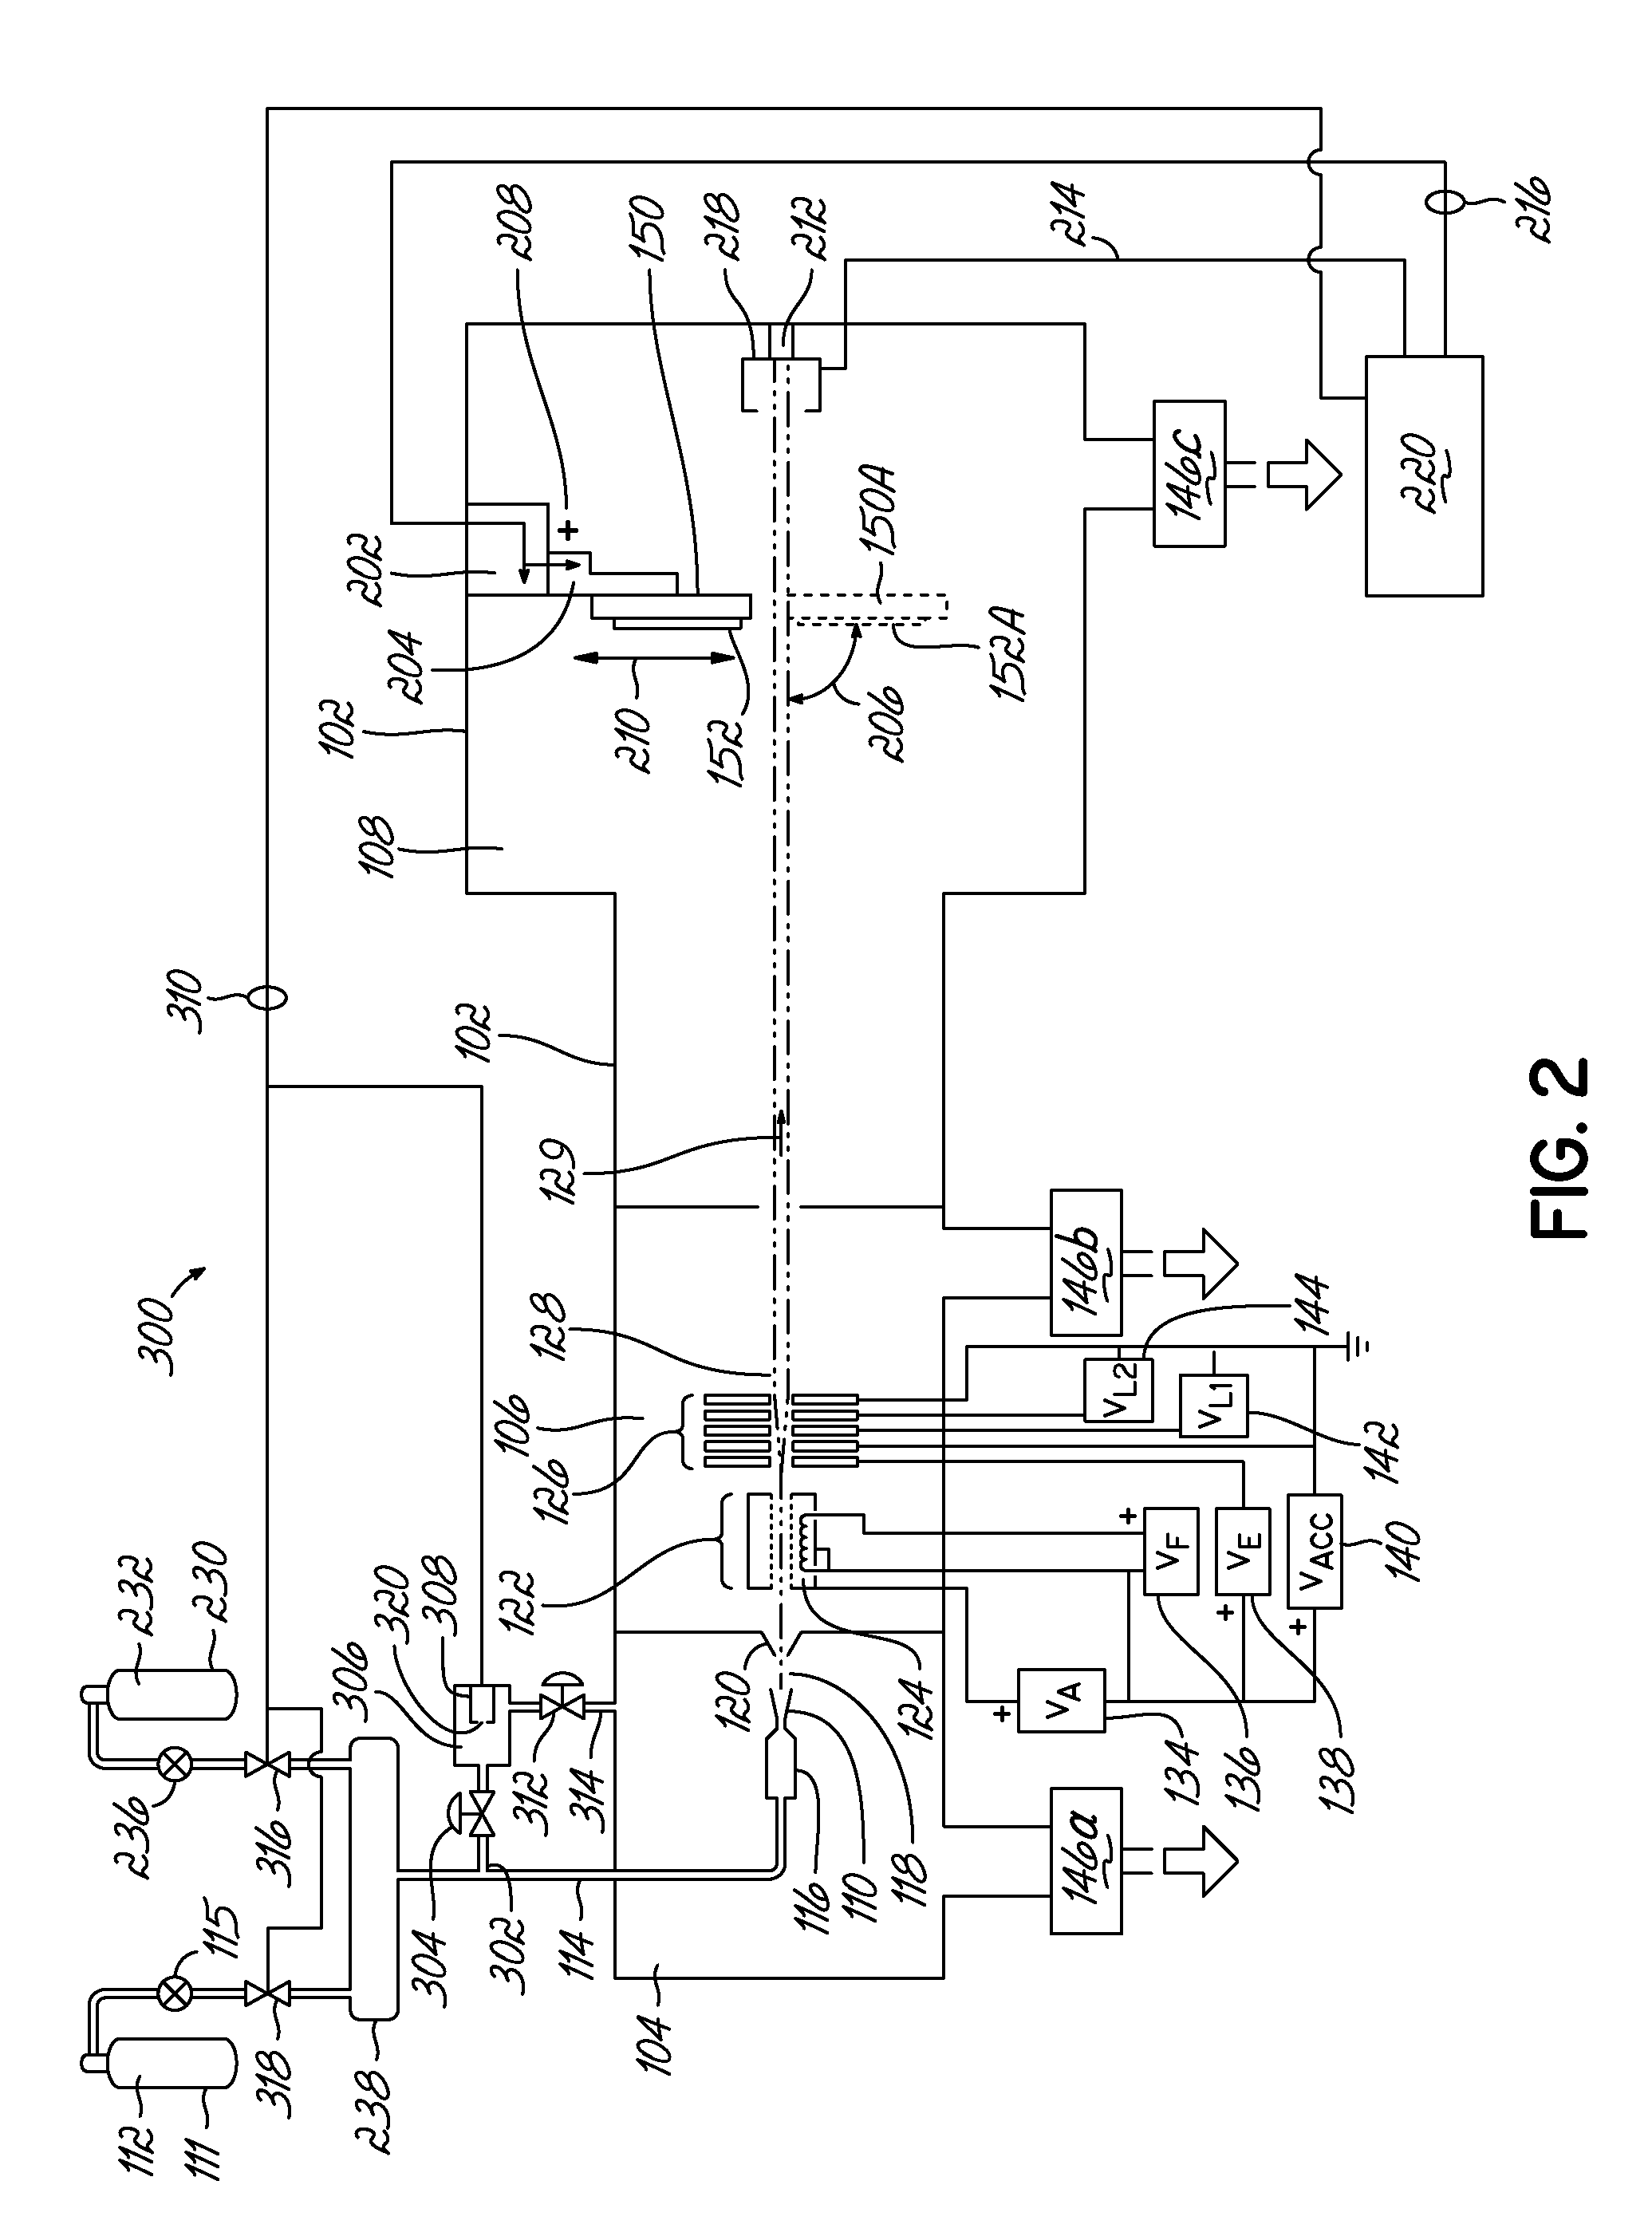 Method and apparatus for controlling a gas cluster ion beam formed from a gas mixture